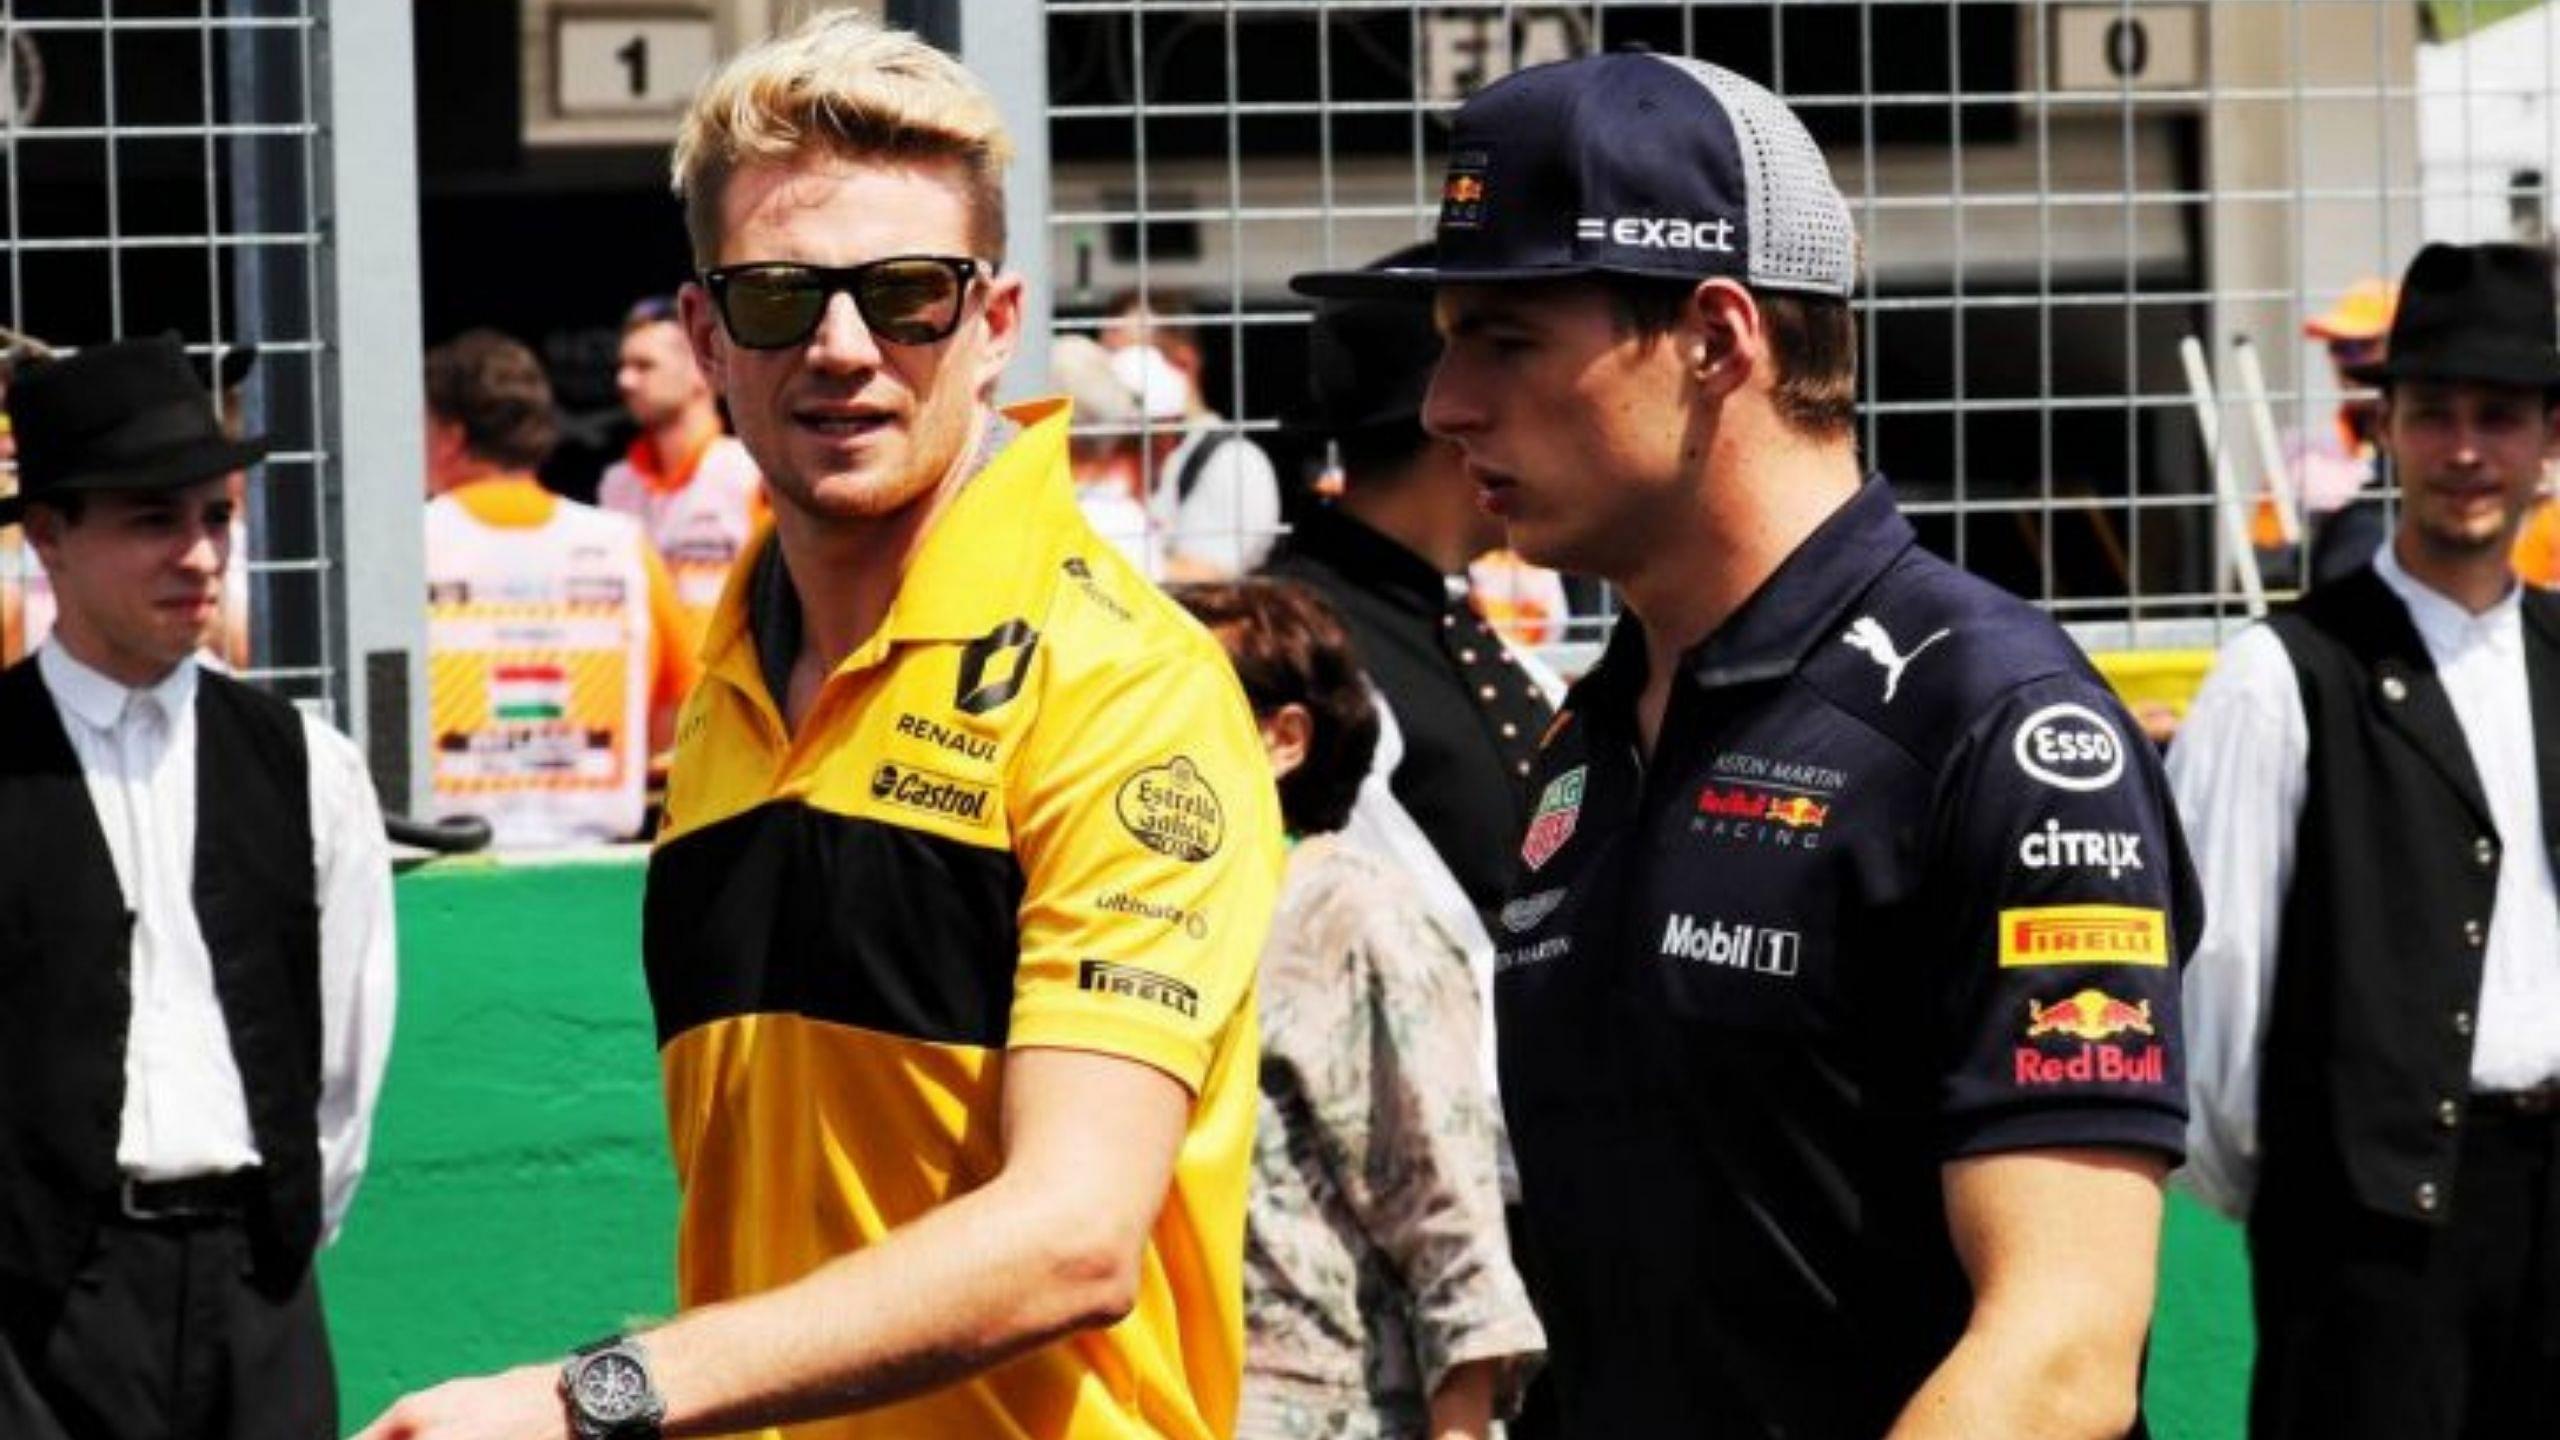 Nico Hulkenberg to Red Bull: Speculation rife that Max Verstappen has asked for Nico Hulkenberg as teammate in Red Bull for 2021